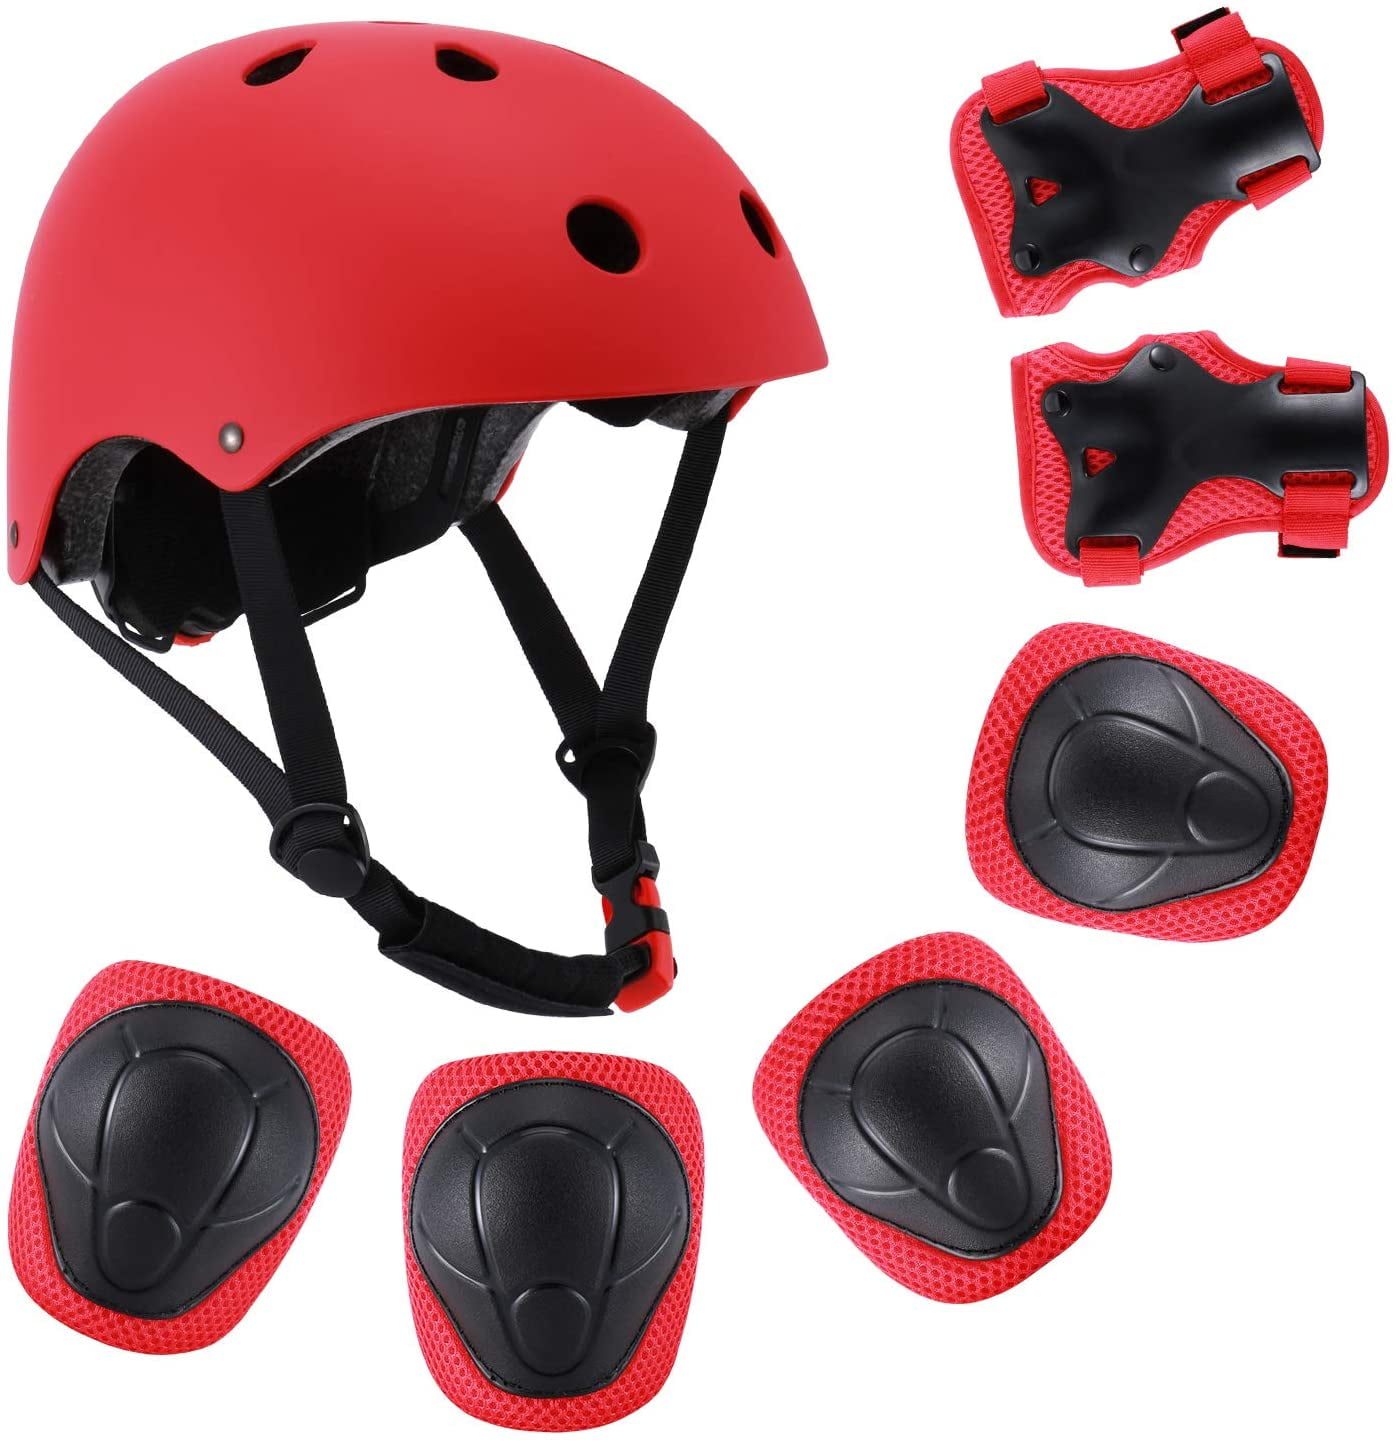 Bicycle Full Face Bicycle Helmet Scooter 52Cm Sport Boys & Girls Kids Motorcycle Helmet for Kids Moped Suitable for Under 10 Years Old 